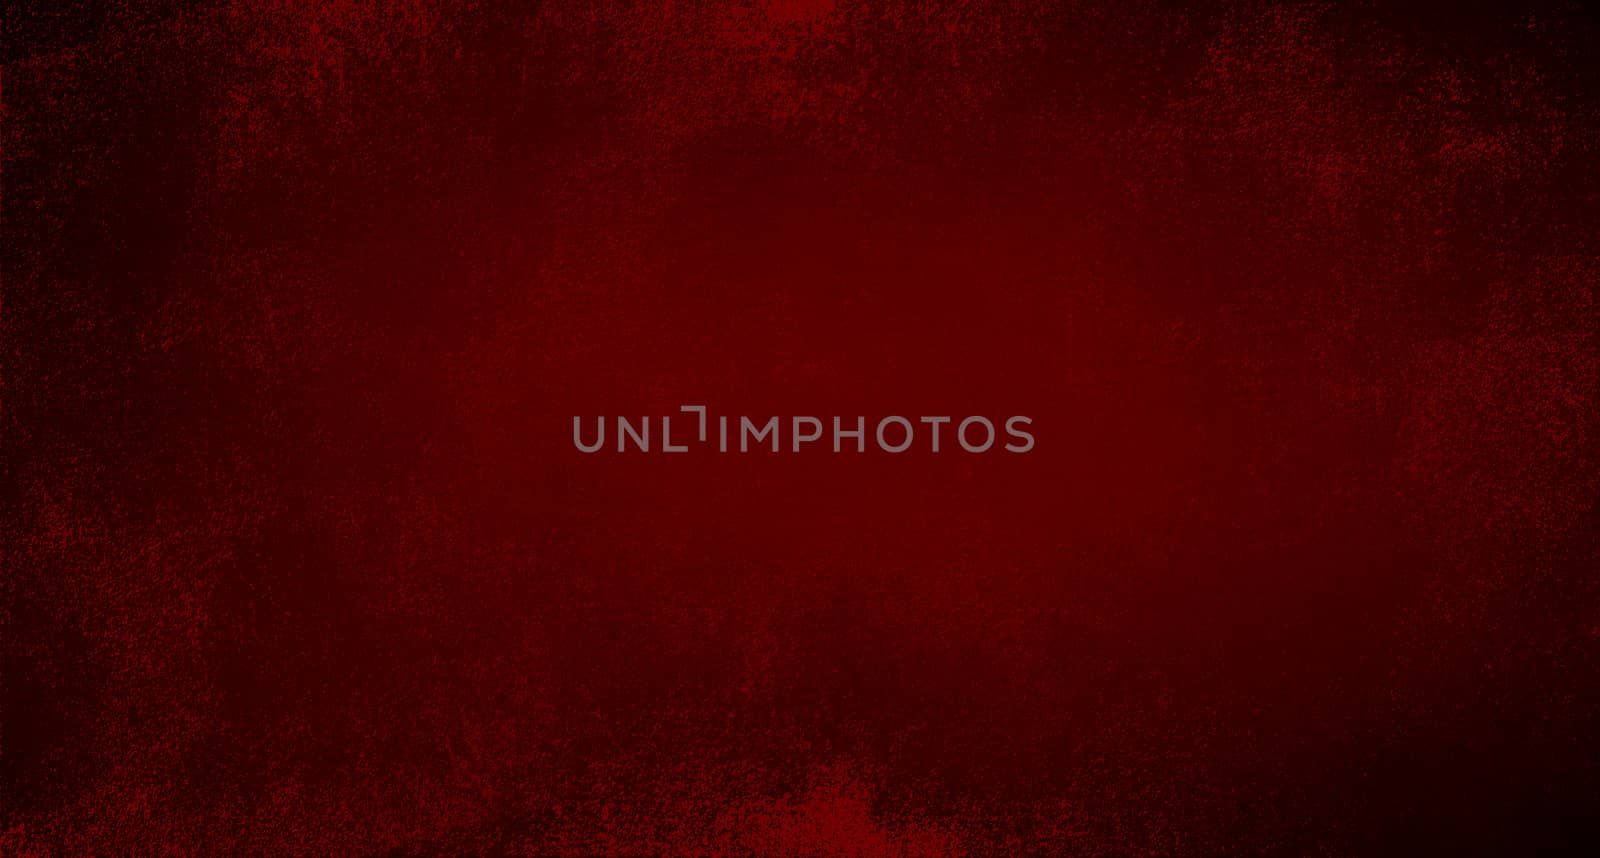 Abstract red vintage background texture, illustration, soft blurred texture in center with blank , simple elegant red background